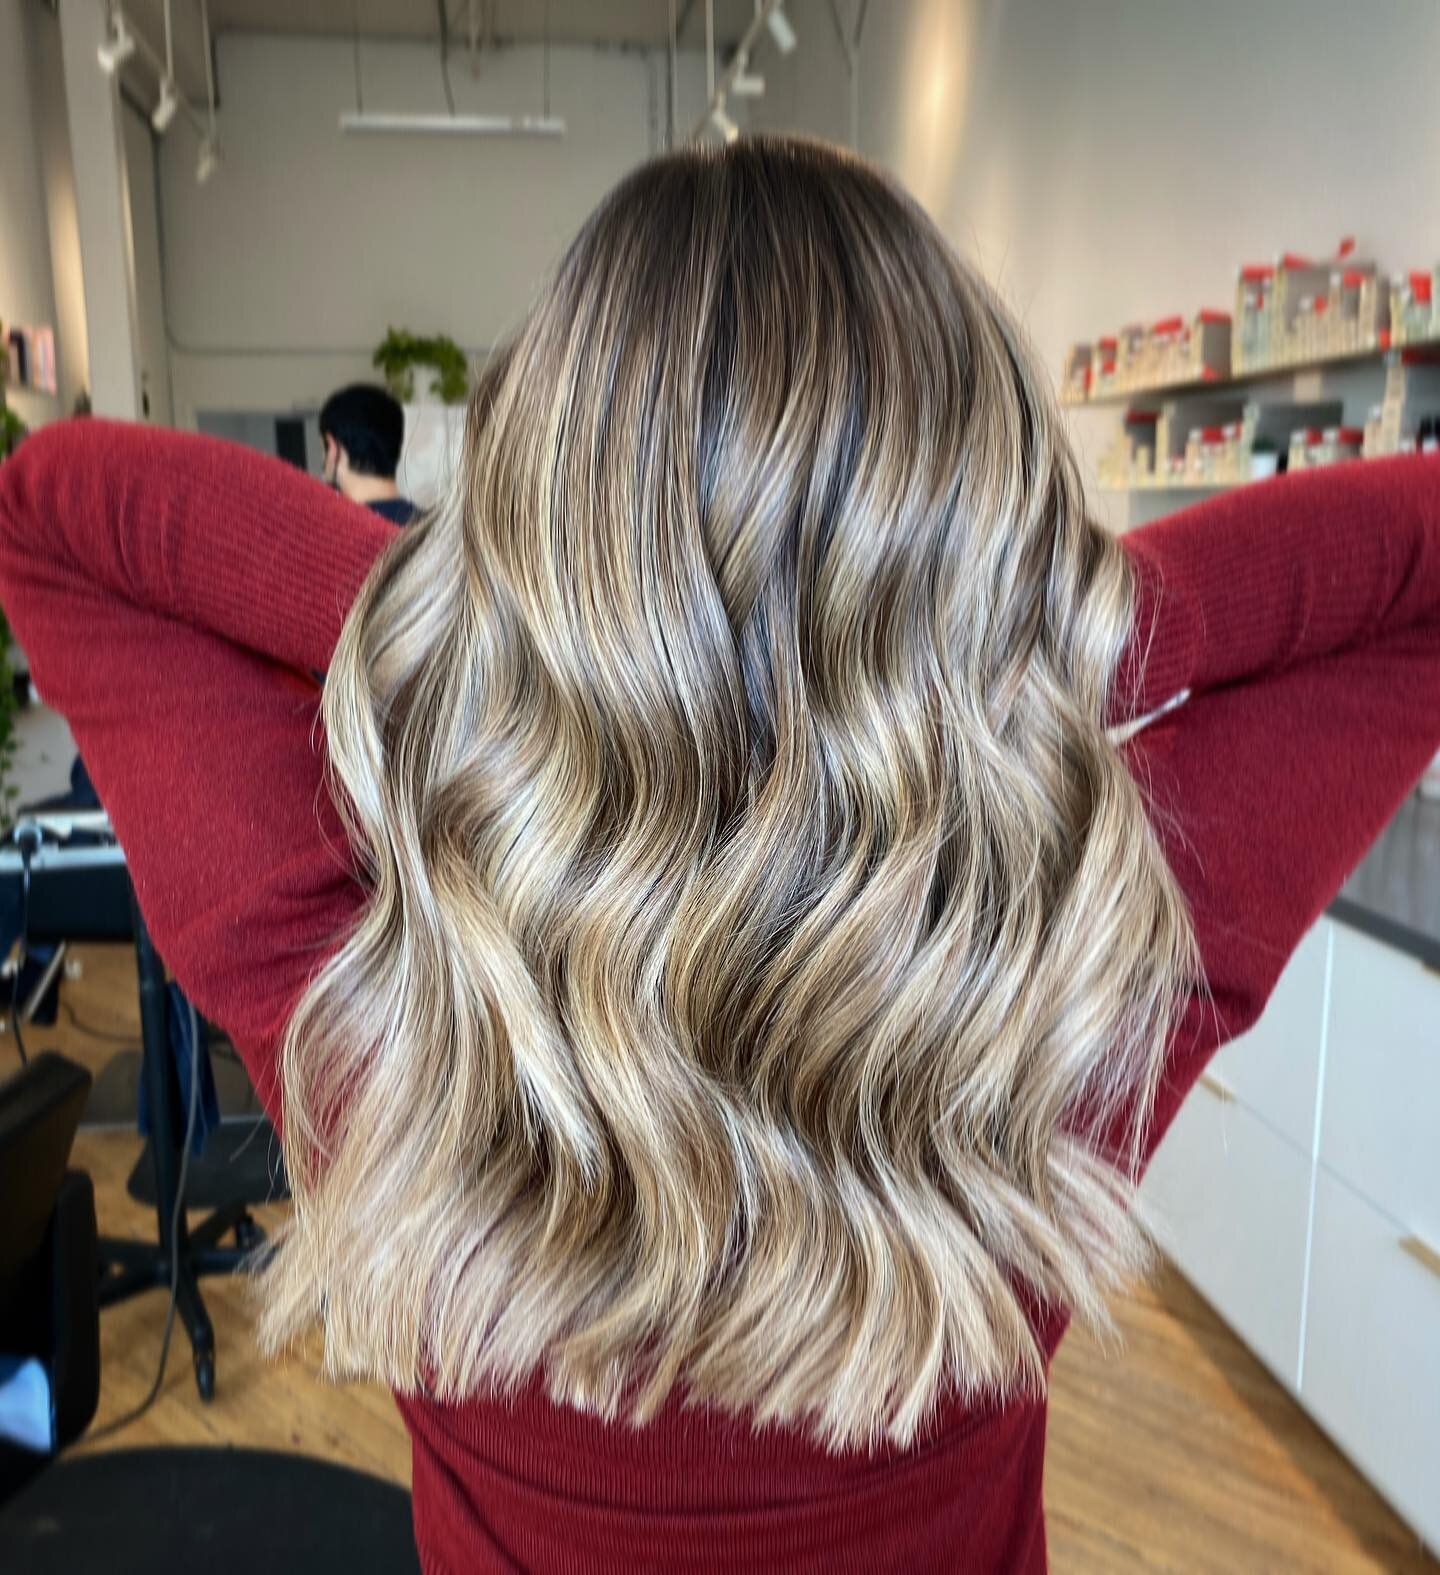 Low maintenance hair takes time (approximately 4 1/2 hours in the chair 😅)
But it&rsquo;s worth it when your result looks like this and you&rsquo;re left with the softest grow out. 
We did a balayage with lowlights to add dimension as well as a root